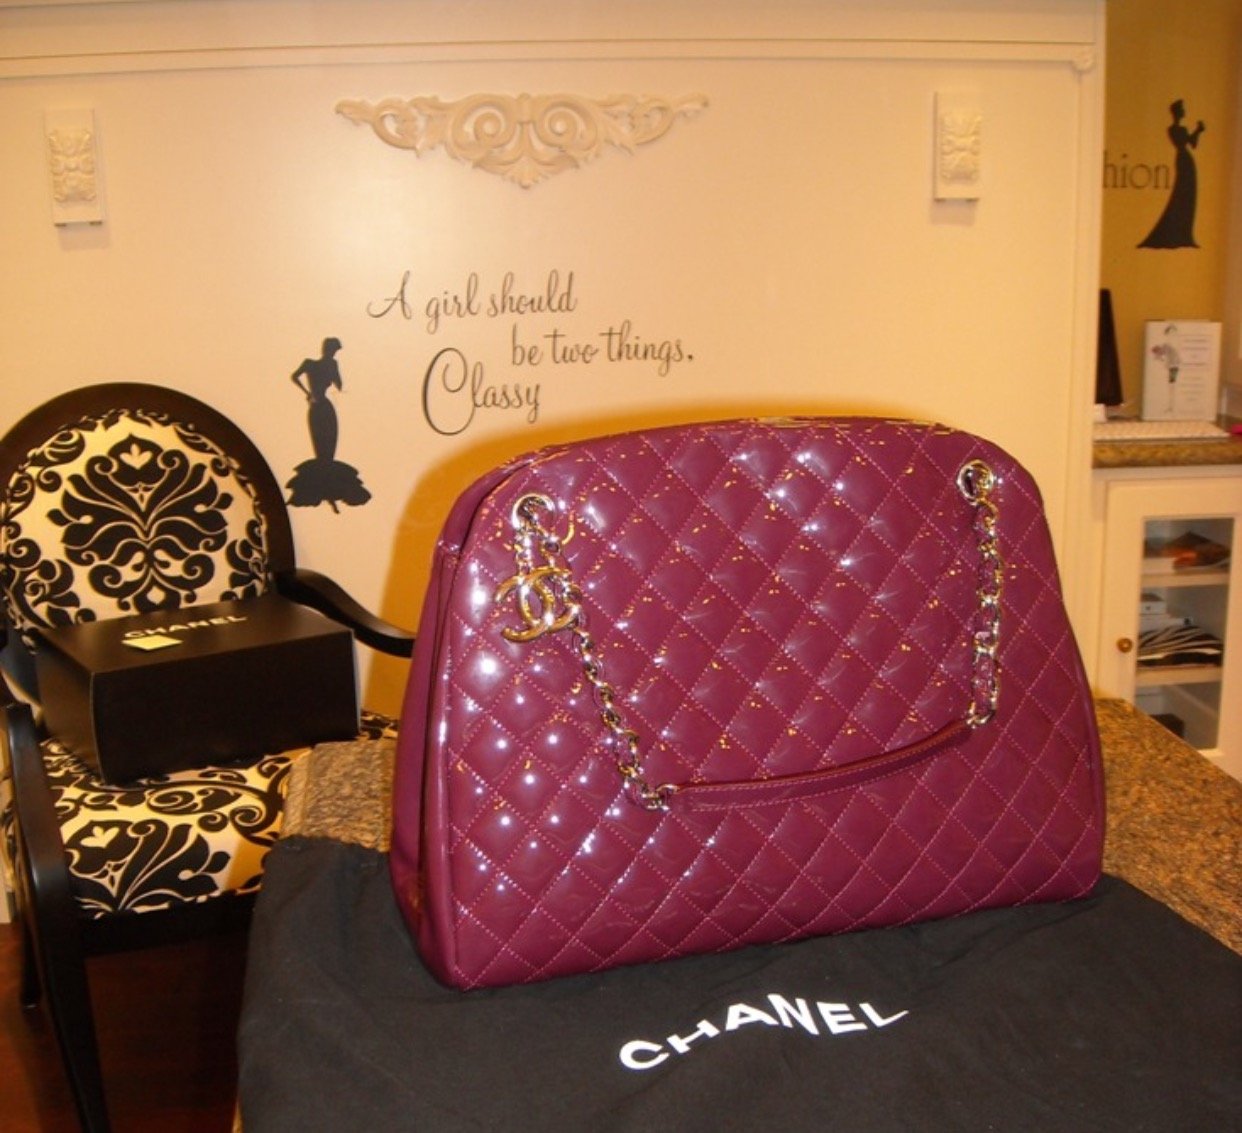 Chanel Red Timeless Just Mademoiselle Leather Bowling Bag Multiple